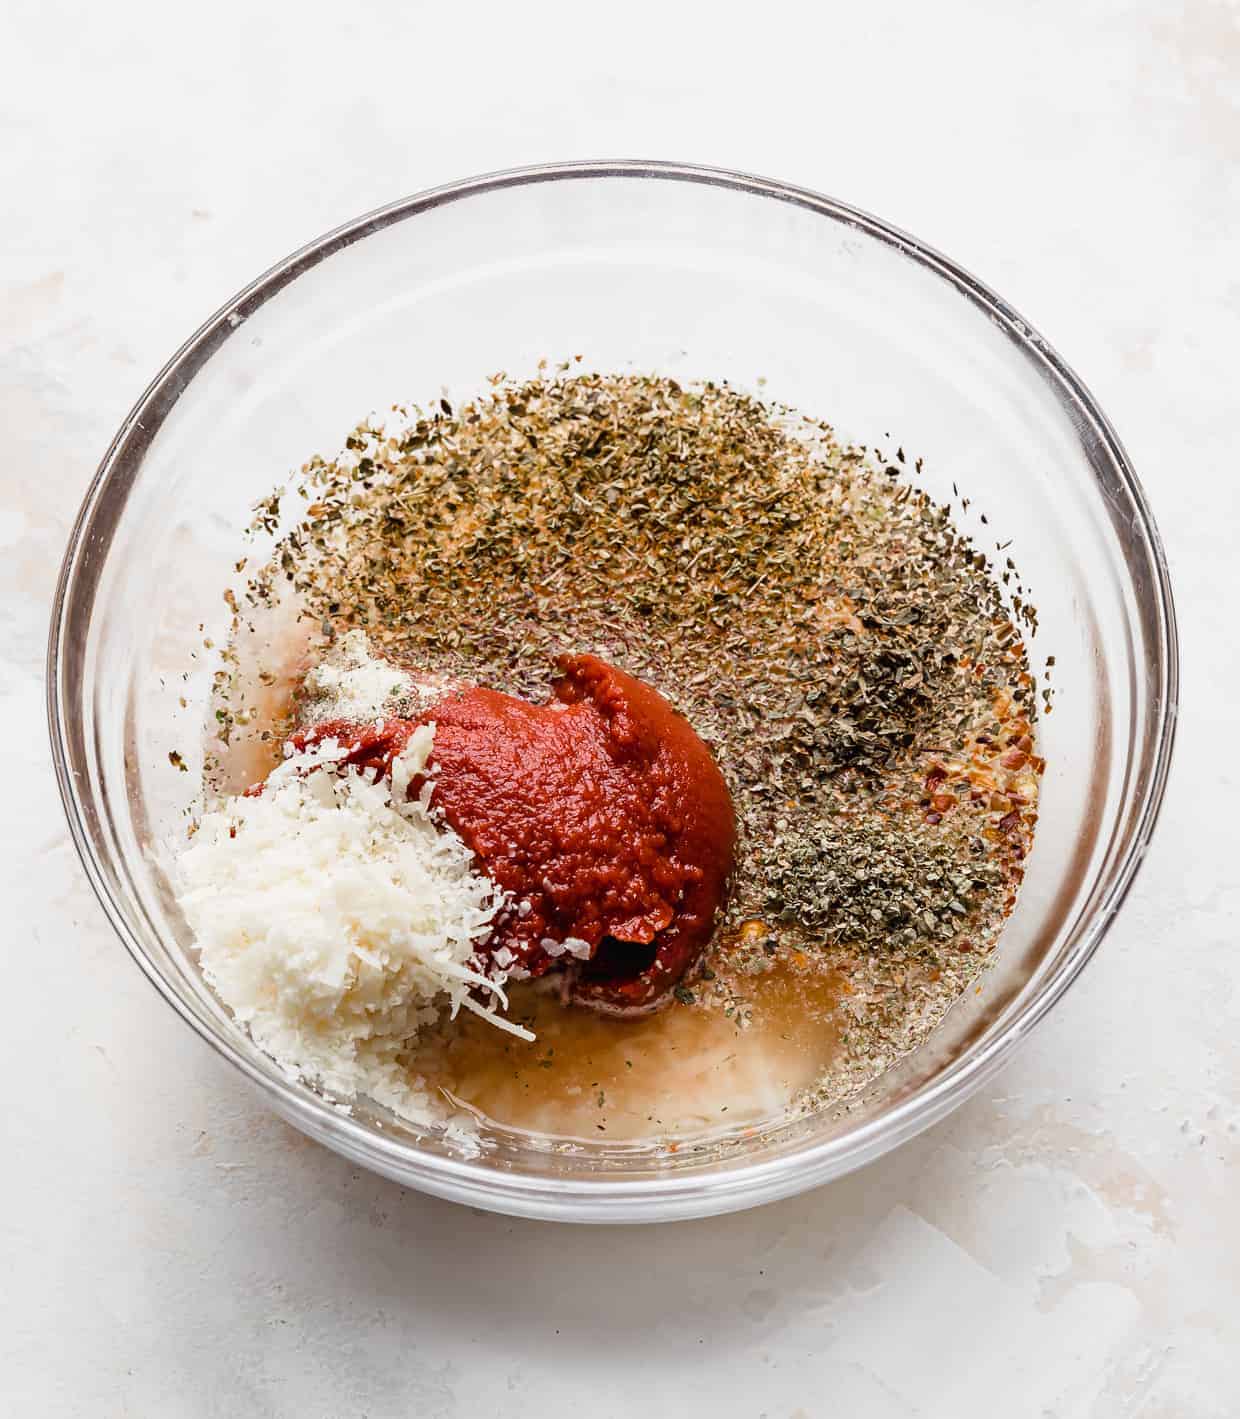 A glass bowl full of ingredients used to make pizza sauce from tomato paste.